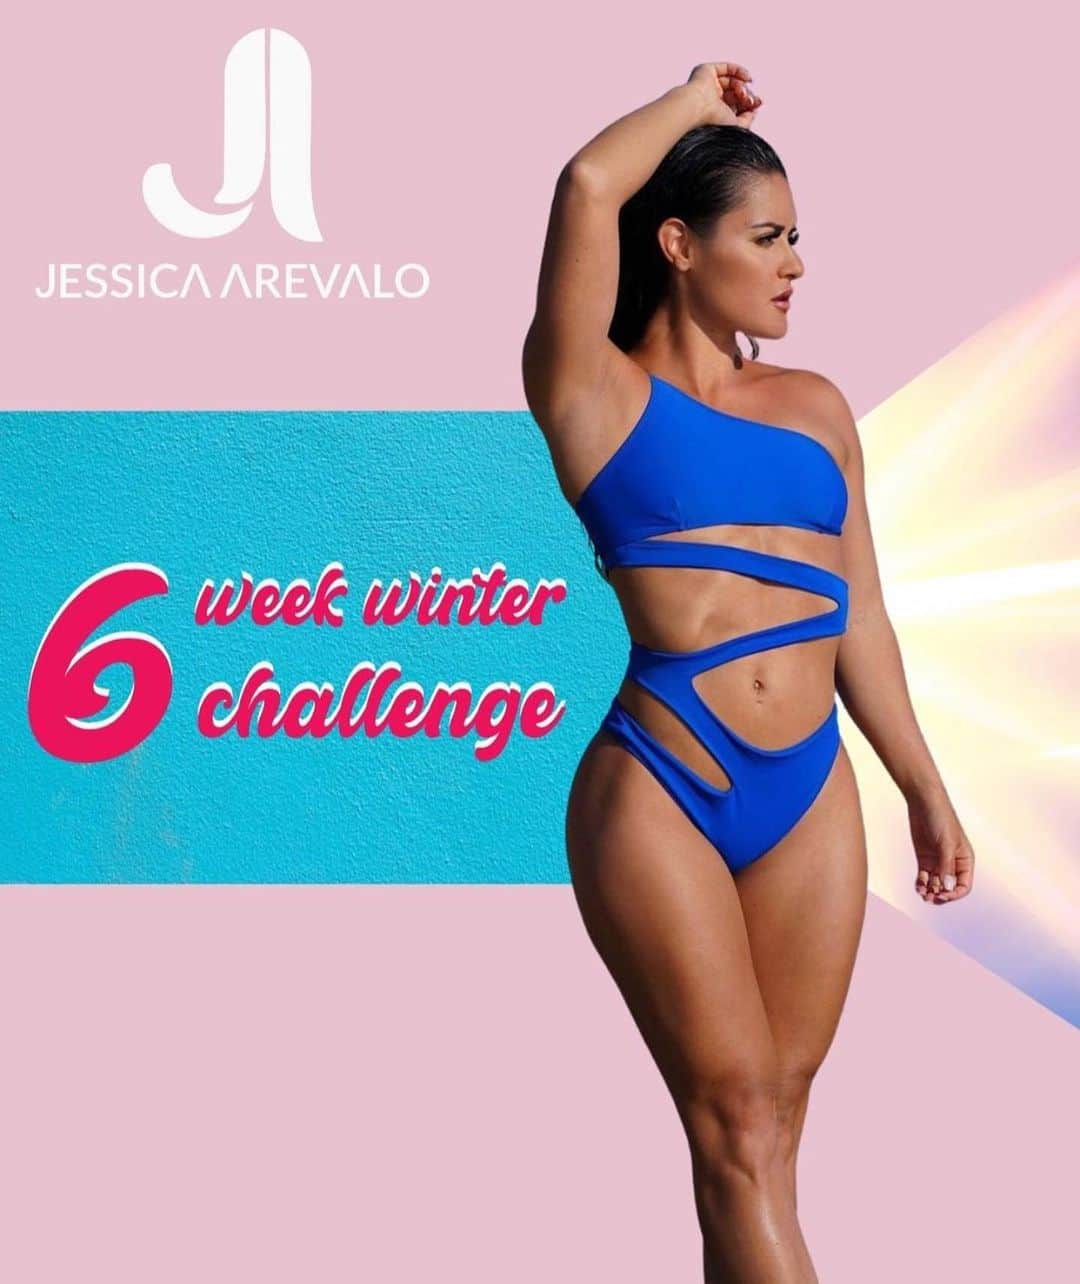 Jessica Arevaloのインスタグラム：「ONLY 6 DAYS LEFT TO SIGN UP! MY 6 WEEK WINTER CHALLENGE IS NOW LIVE!😍  💥IF YOU ARE LOOKING TO TONE UP, LOSE FAT OR LEARN MY WAYS THIS CHALLENGE IS FOR YOU!💥 - Open enrollment is through Dec 13 & the challenge starts Dec 14! DON’T WAIT!🙌🏼 - 🔺My 6 Week Winter is challenge is just $99!!!  🔺This program includes: - 🔺BOTH GYM/HOME WORKOUTS  - 🔺Over $6k in cash prizes - 🔺One on One Coaching with me - 🔺Weekly Check ins - 🔺Workout Program +Macros/Meal Plans + Cardio Regimen  - 🔺Private Facebook Group and more! - 🔺WORLDWIDE ENTRY  - 🔺 FOR WOMEN & MEN  - CHECK OUT LINK IN BIO TO SIGN UP!👆🏼If you have any question please feel free to DM me directly!📩」